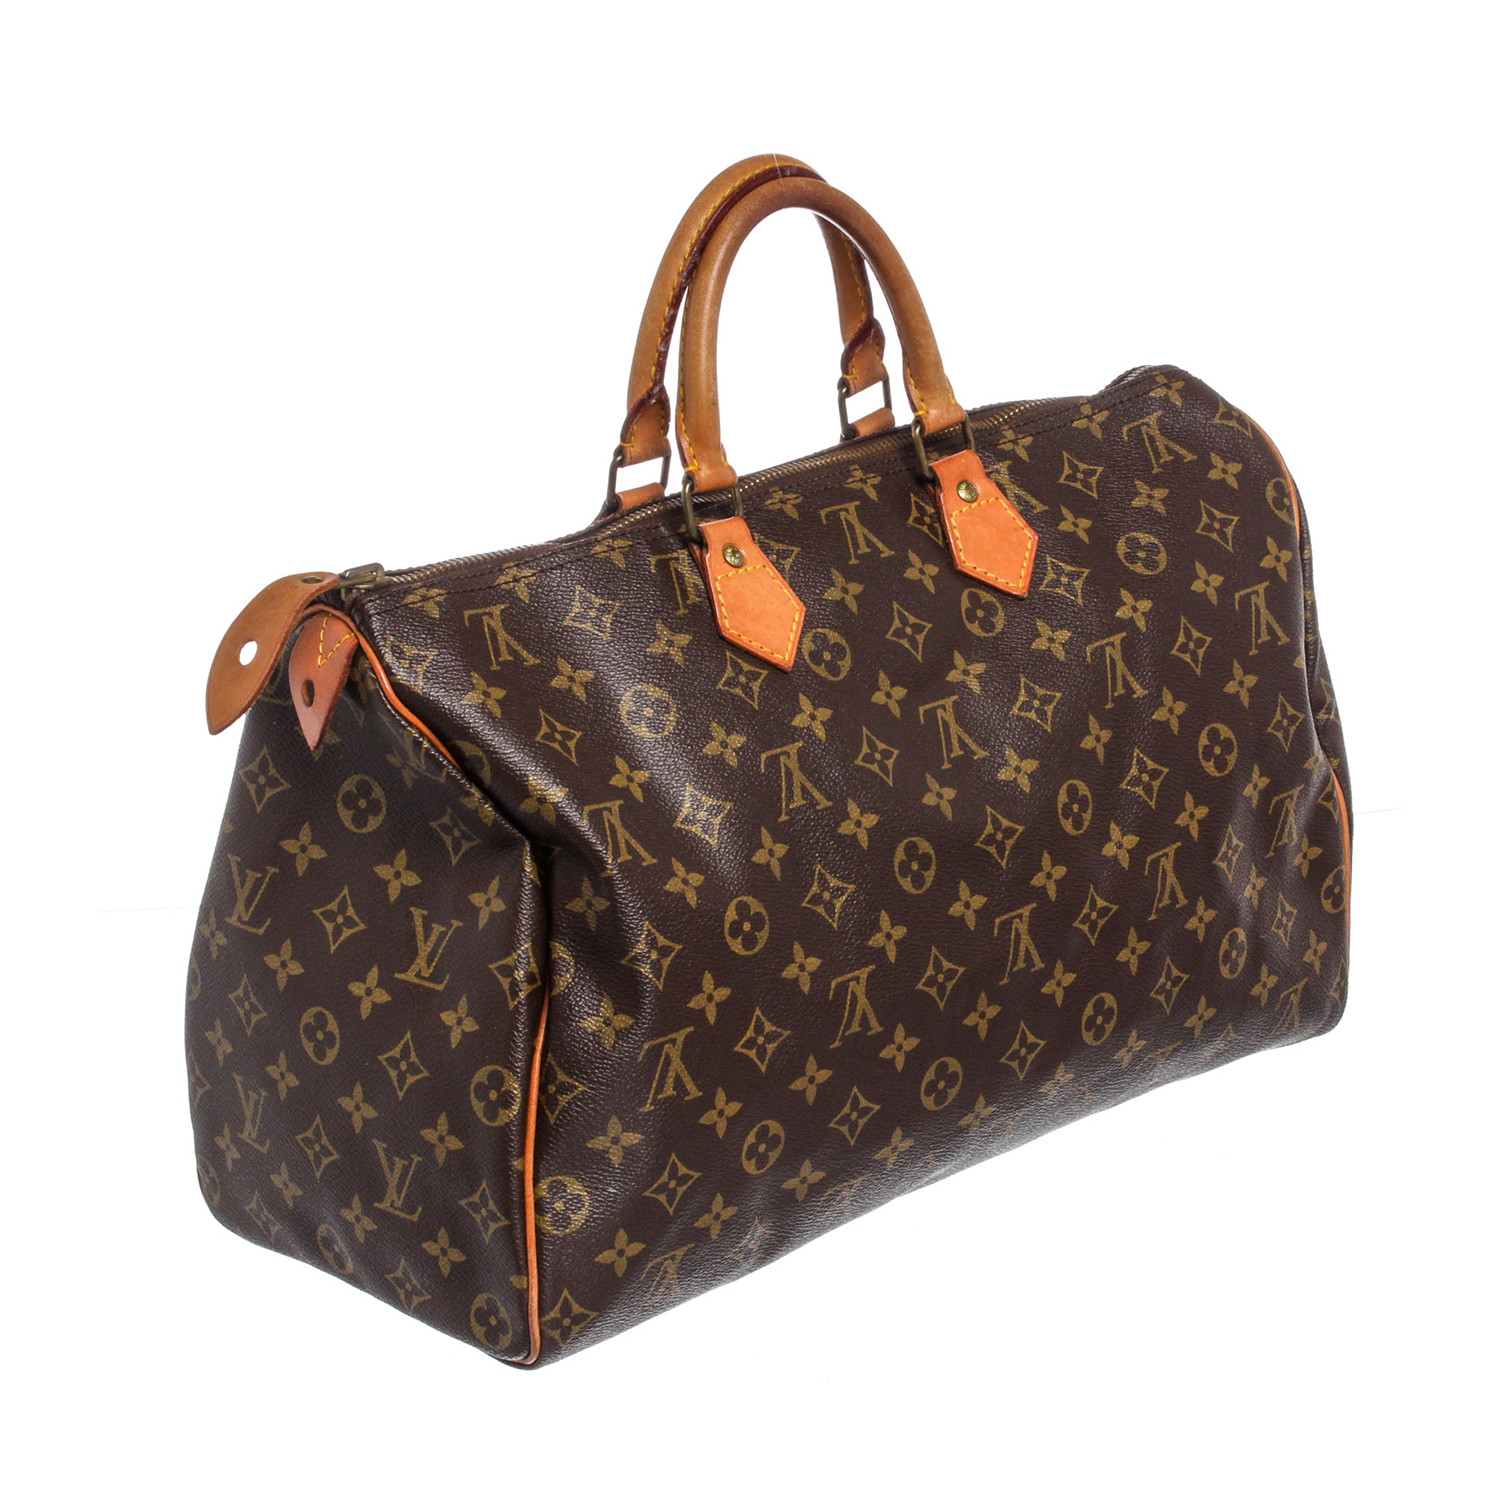 Louis Vuitton // Monogram Canvas Leather Speedy 40 cm Bag // 841SA // Pre-Owned - Pre-Owned ...